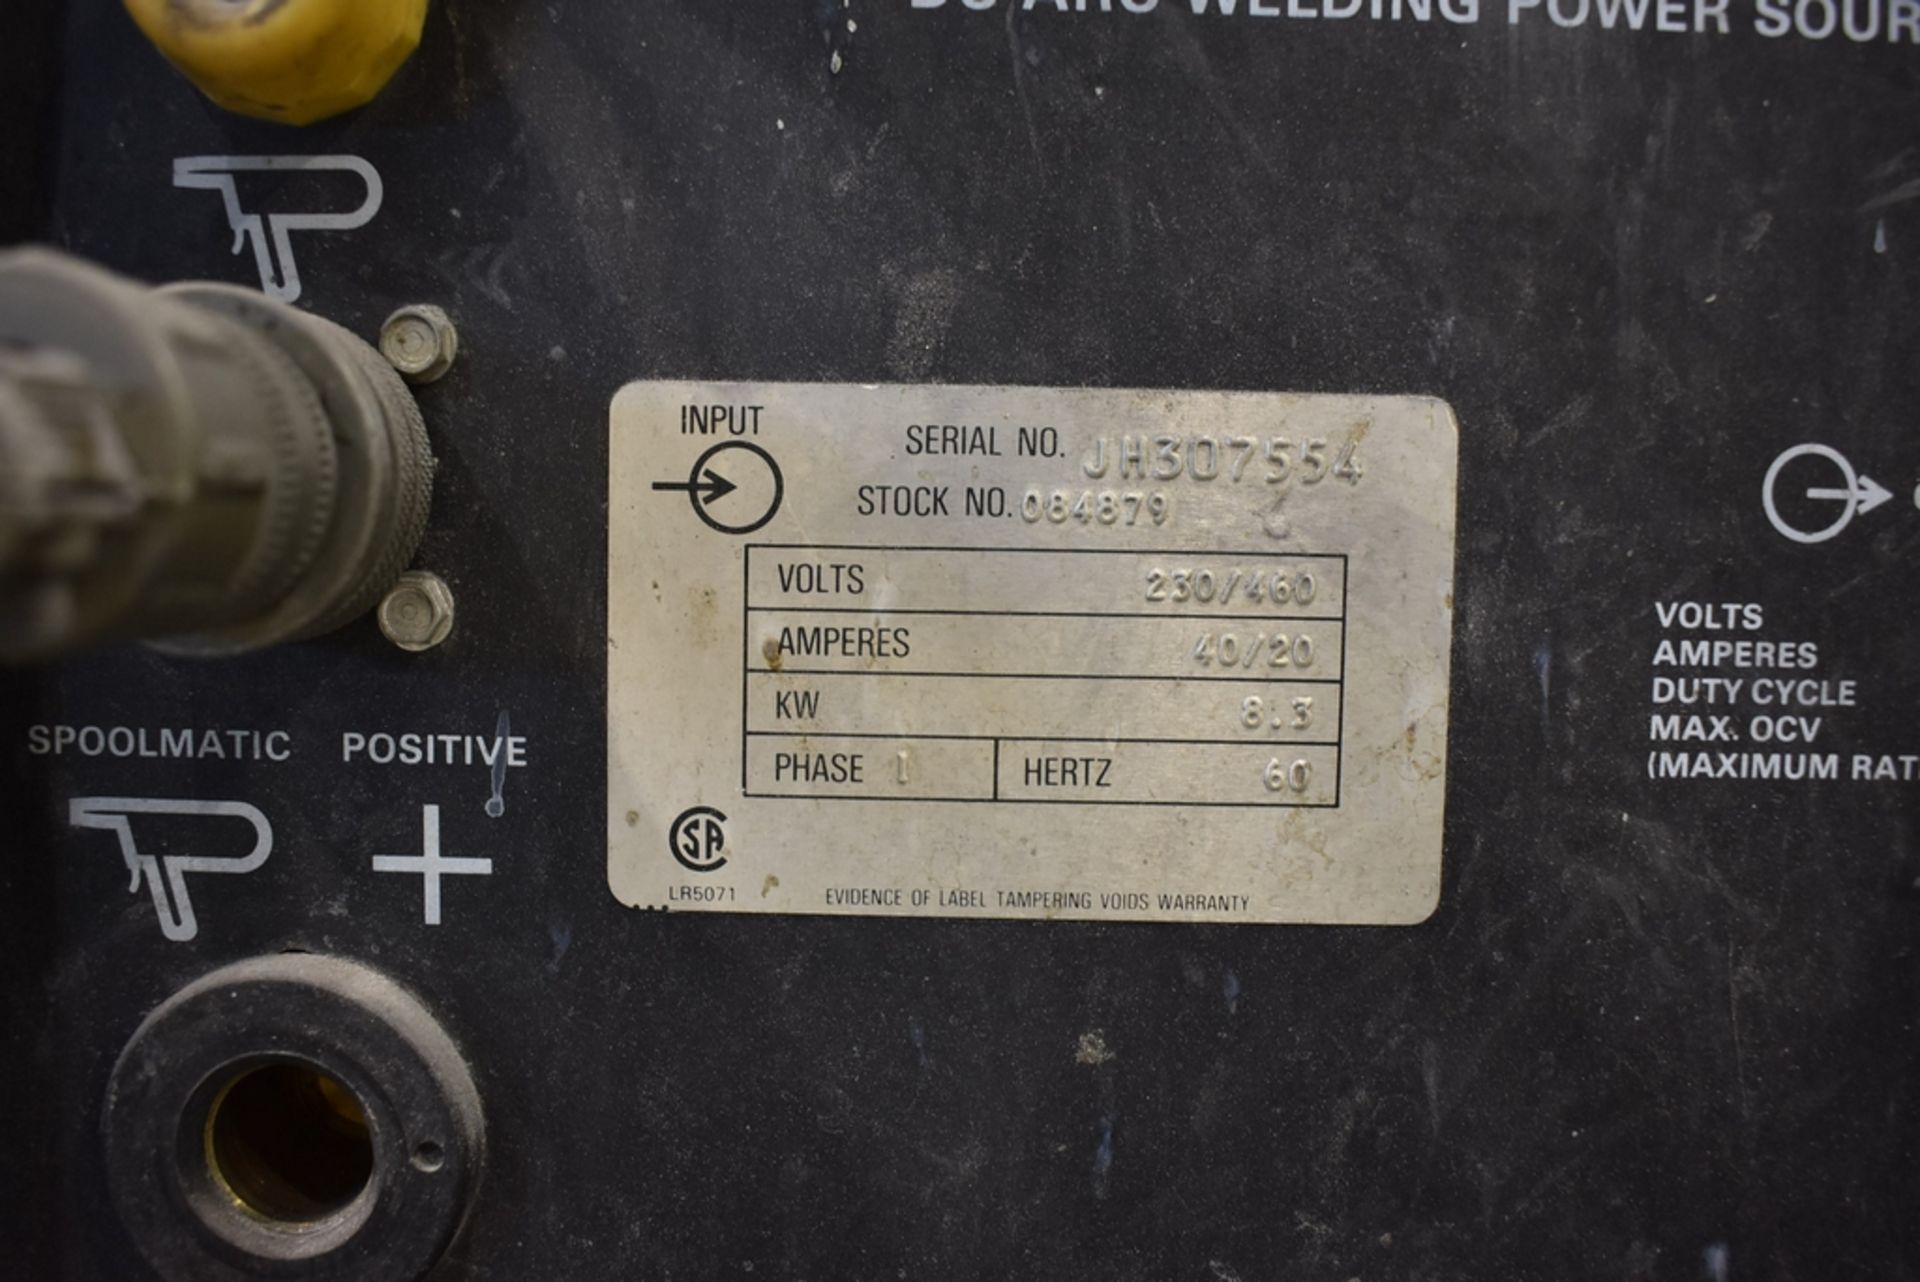 MILLER SPOOLMATE 200 CONSTANT POTENTIAL DC ARC WELDING POWER SOURCE S/N JH307554 - Image 3 of 3